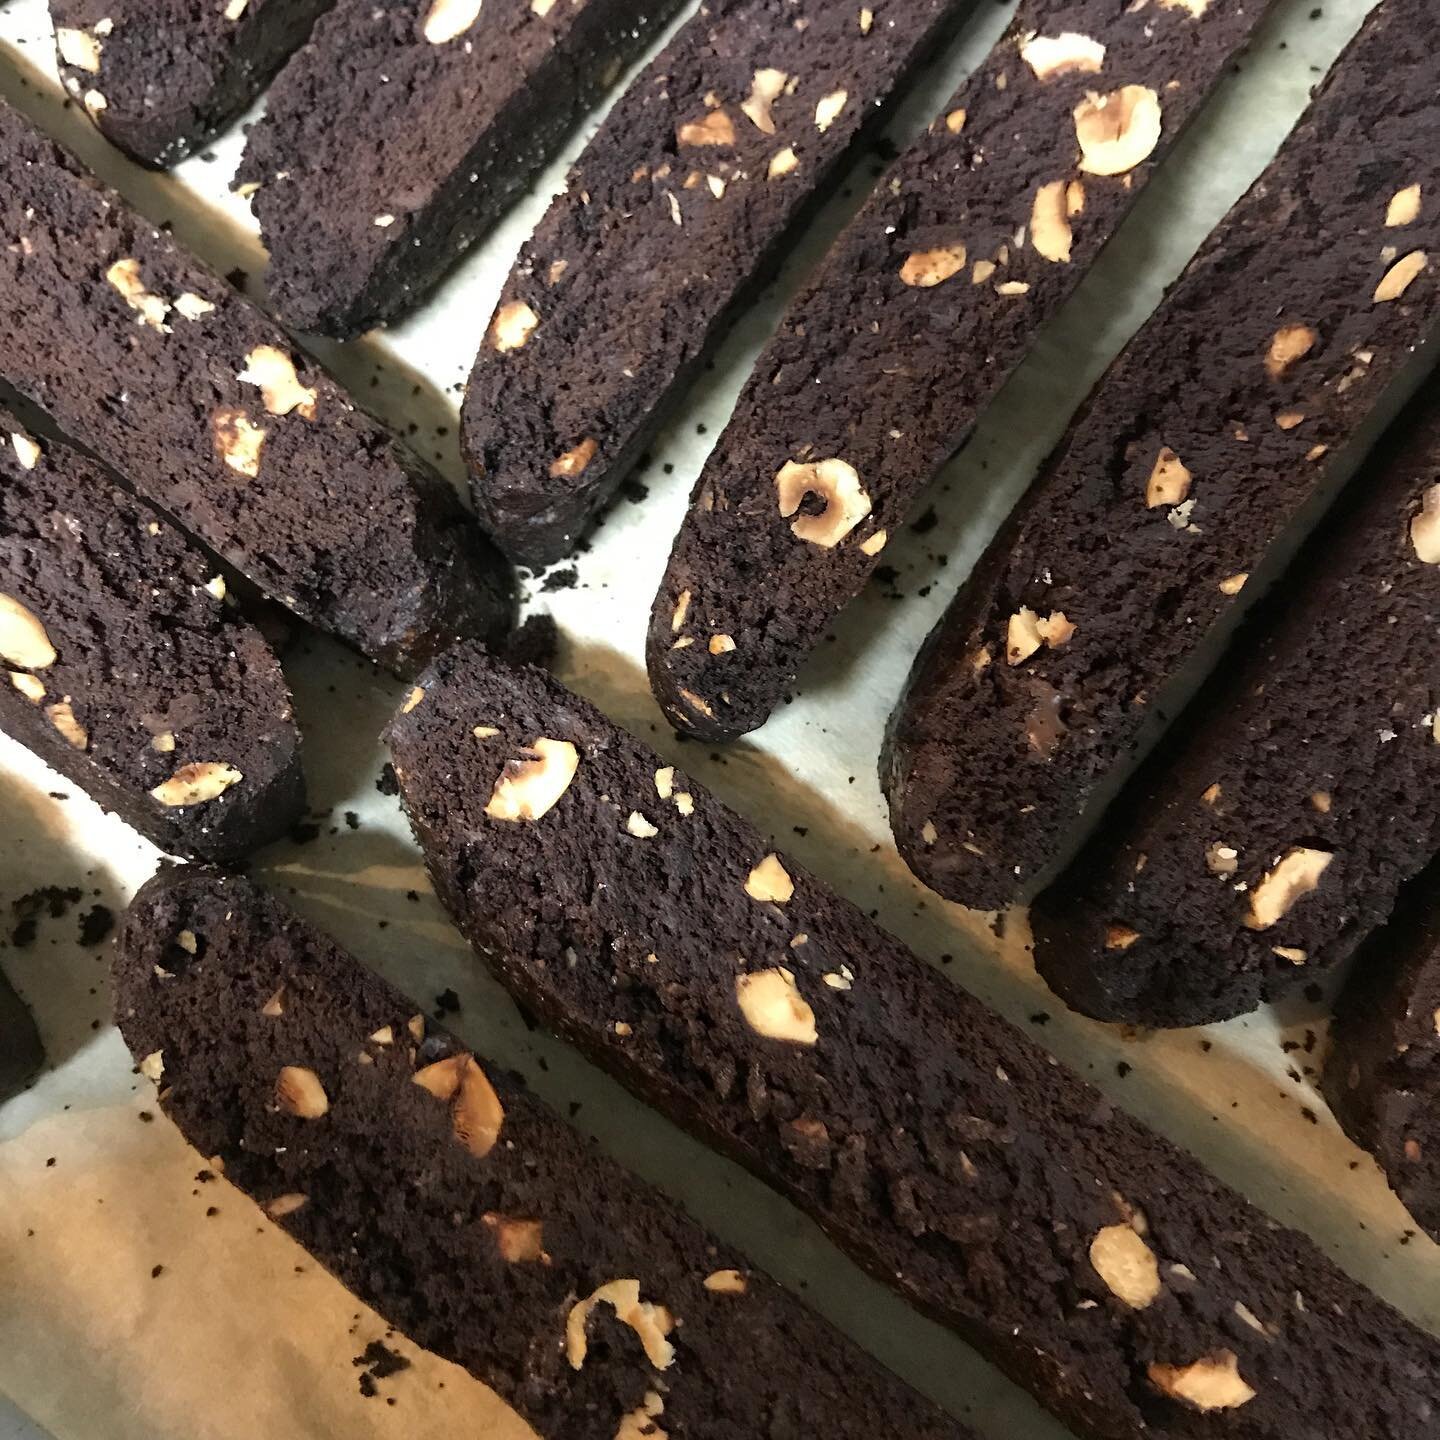 Haven&rsquo;t posted here in a while...I&rsquo;ve been baking some fun things! Chocolate hazelnut biscotti and sweet tahini buns... mmmm. (Thankfully, not in my kitchen so I don&rsquo;t eat them all!) lol